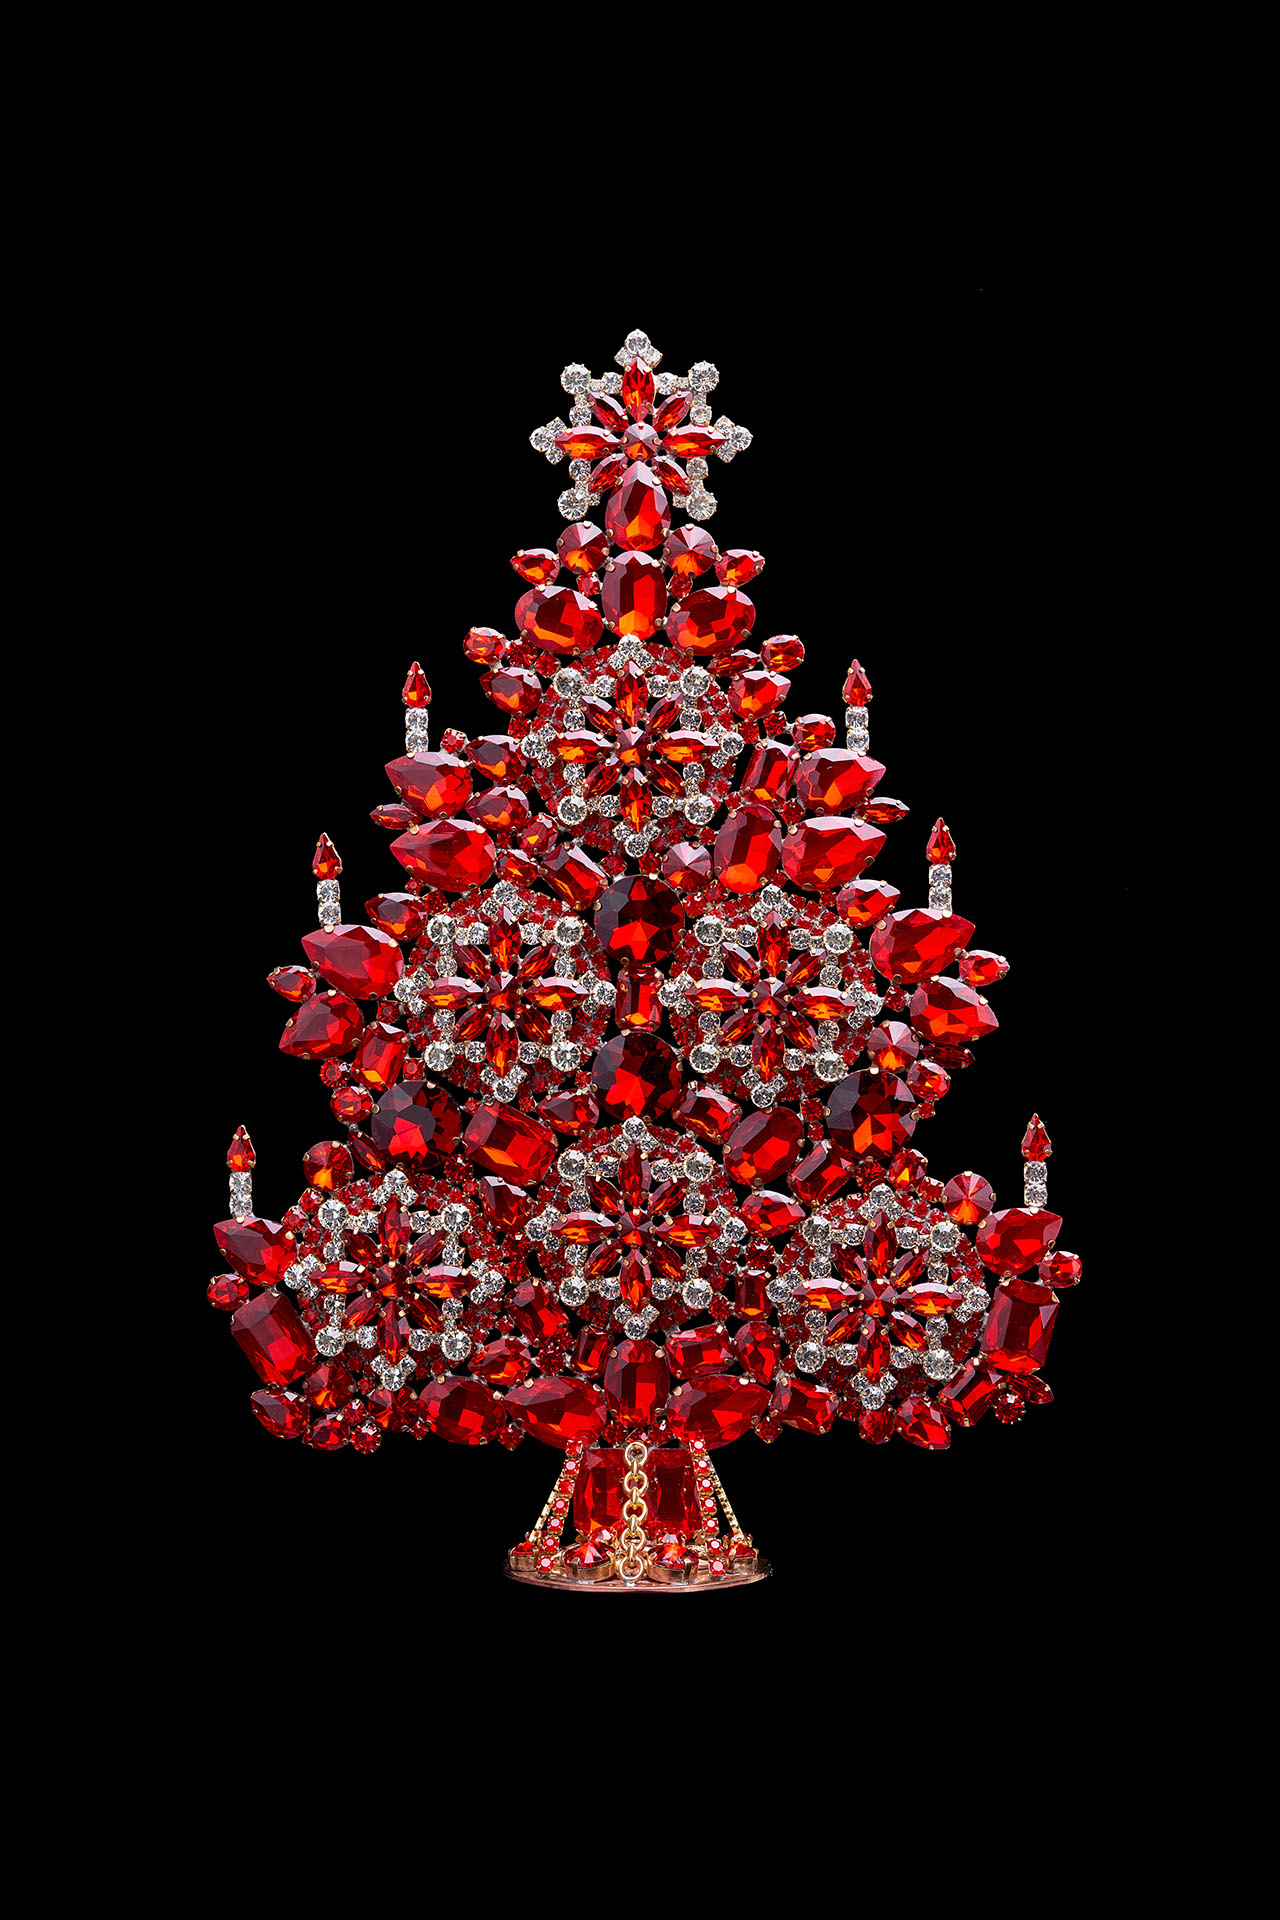 Opulent Xmas Tree, handcrafted with glass tree decorations.